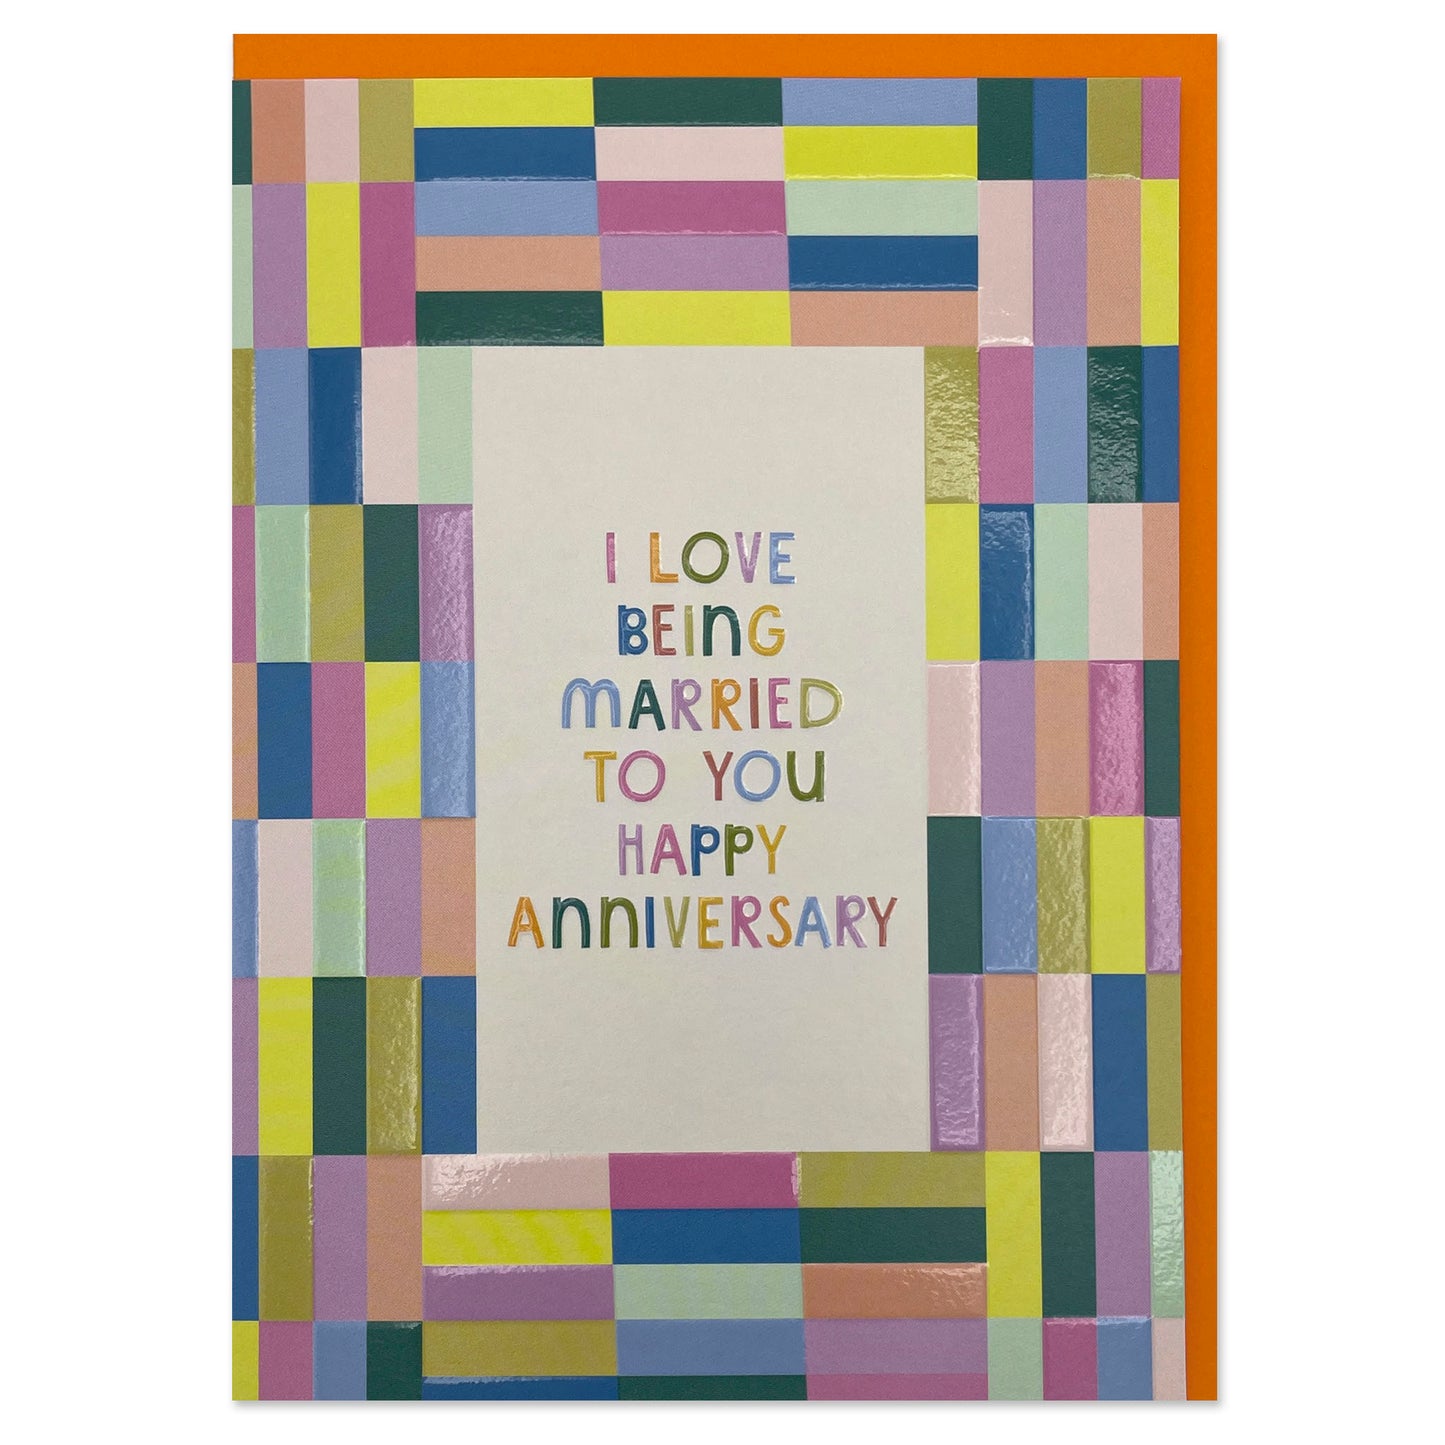 I love being married to you. Happy anniversary Card